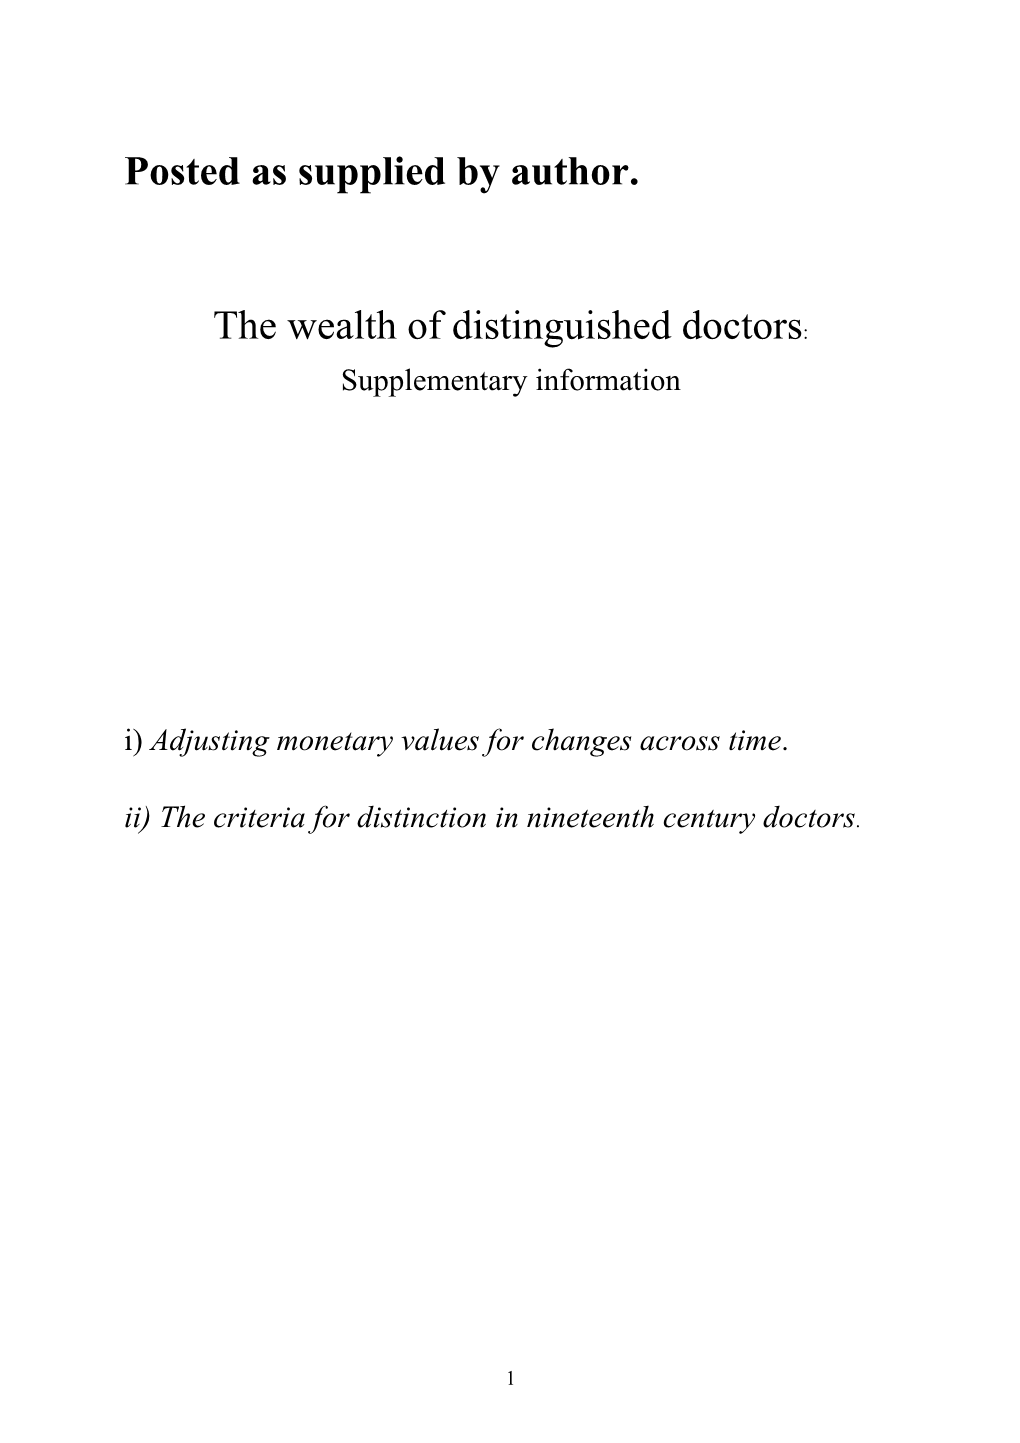 Posted As Supplied by Author. the Wealth of Distinguished Doctors